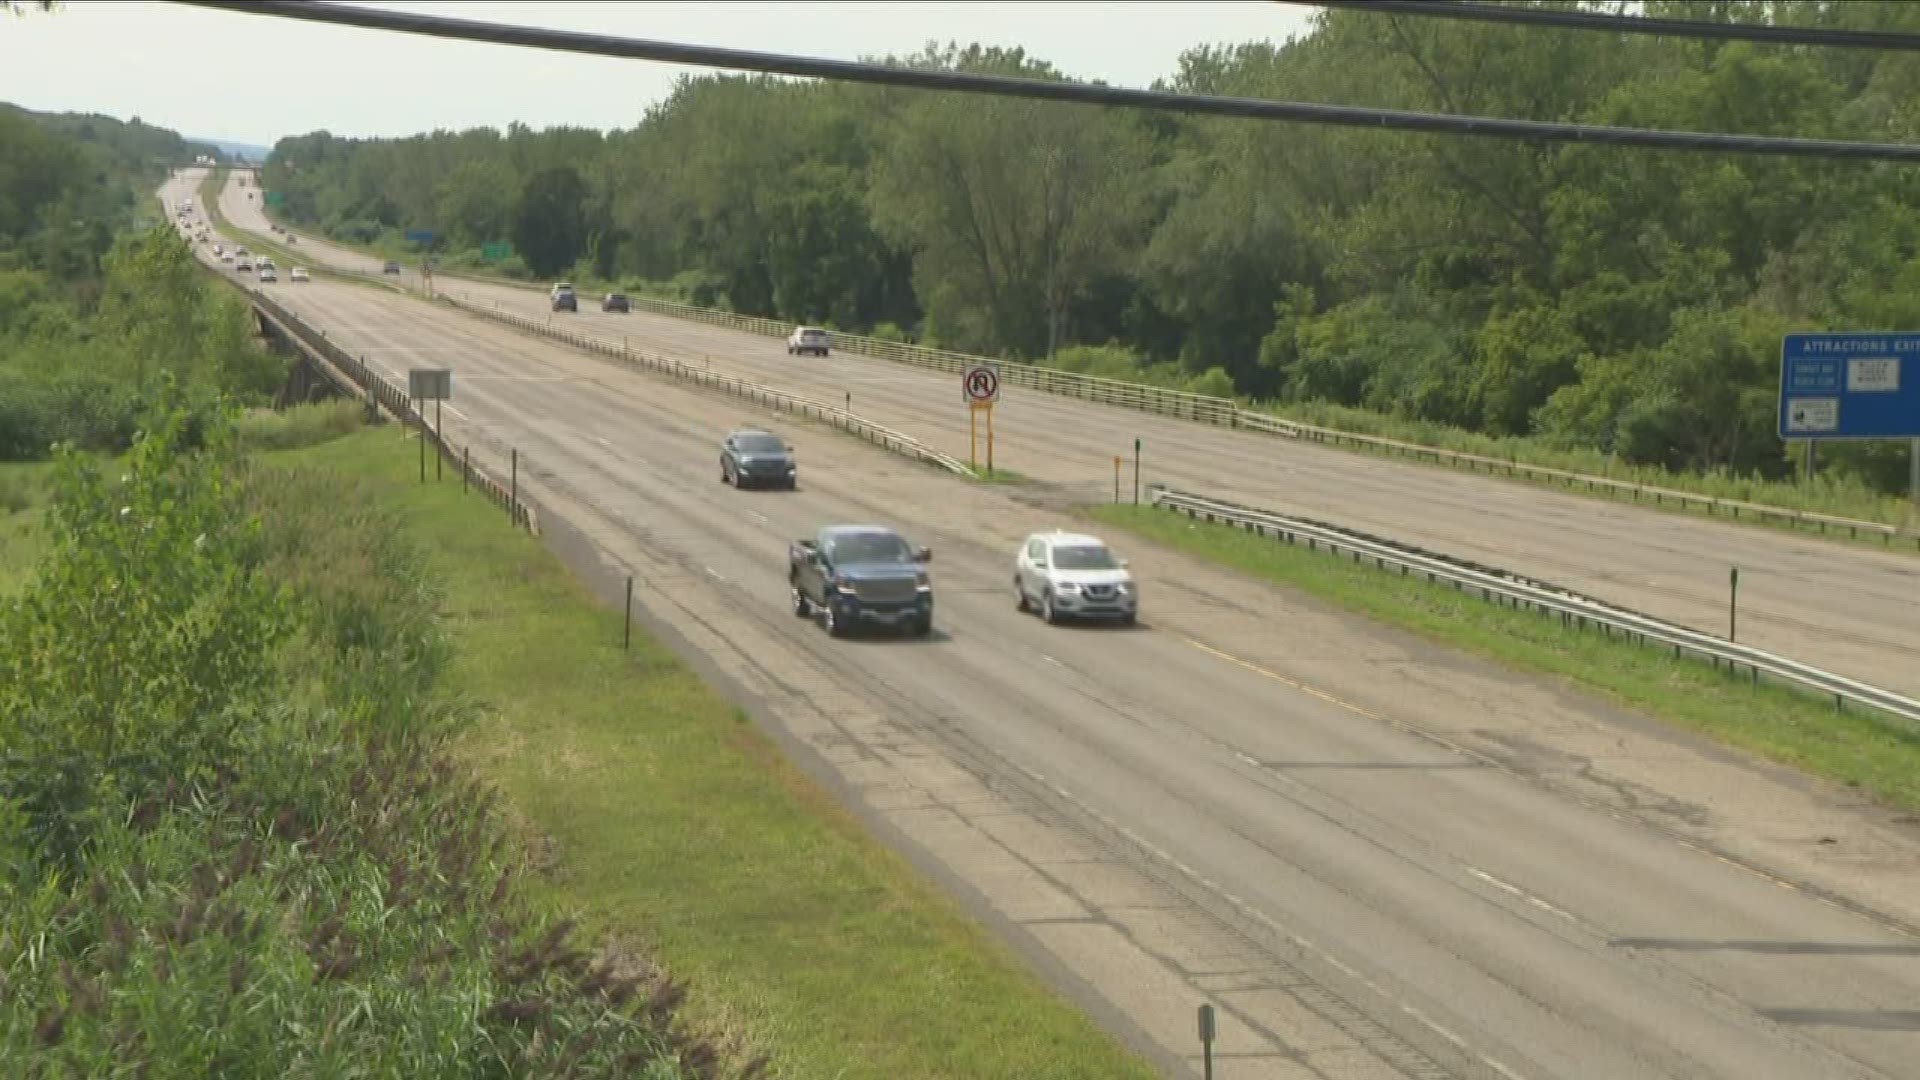 The Thruway Authority says it's ready to fix a bumpy stretch of the interstate through the Seneca nation's Cattaraugus Territory  tomorrow if only the Seneca will permit them to do so.